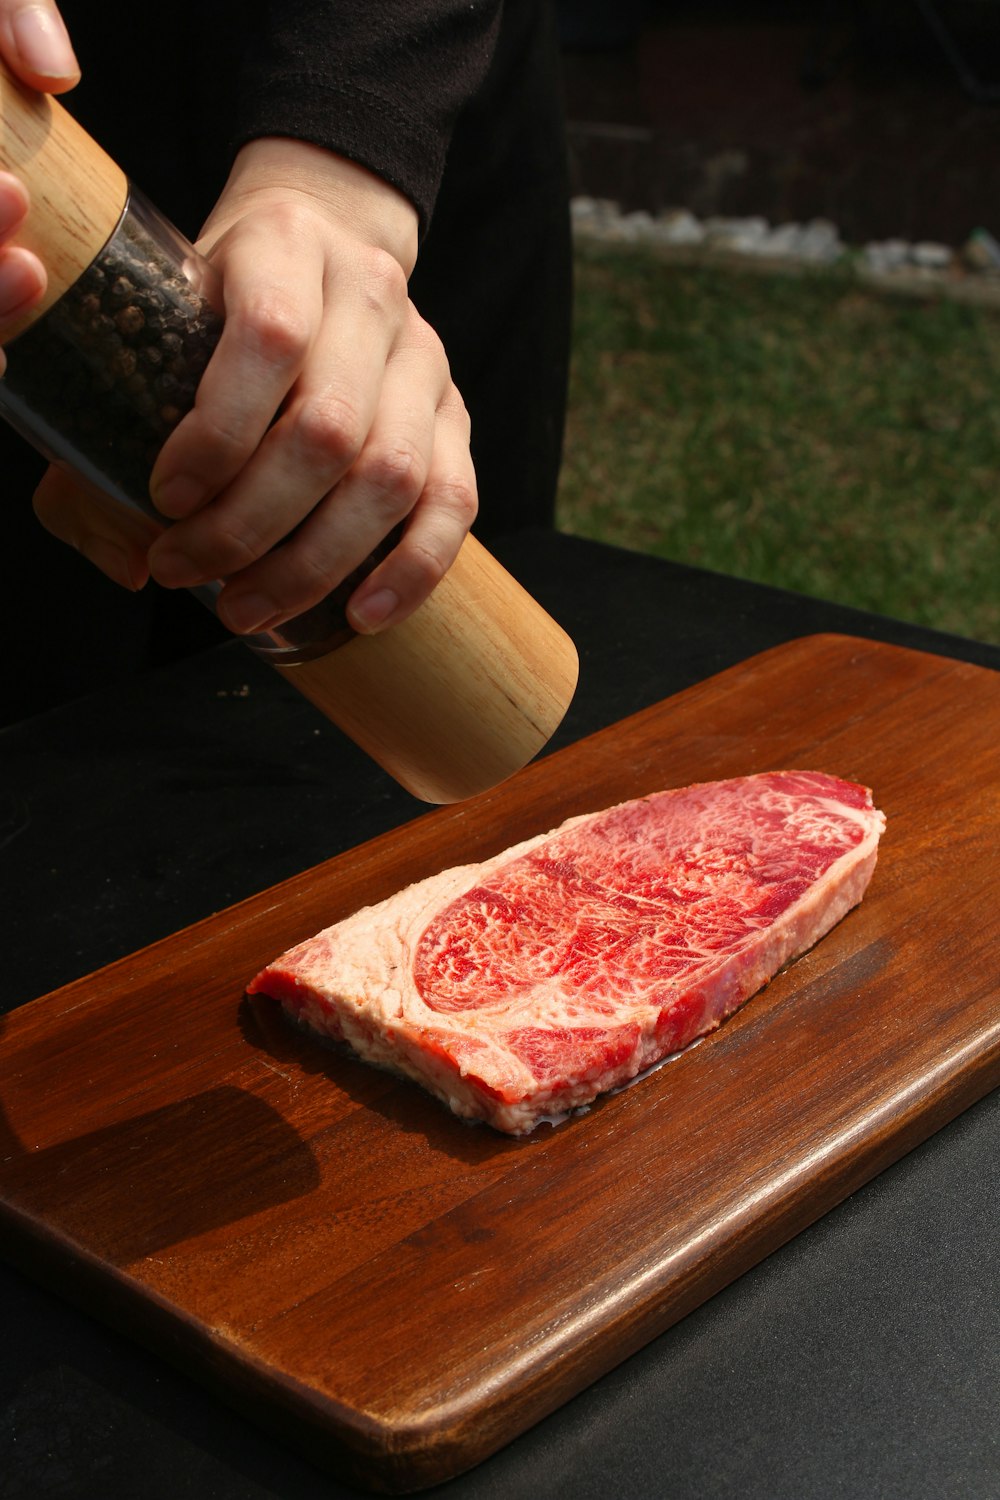 a piece of raw meat being prepared on a cutting board